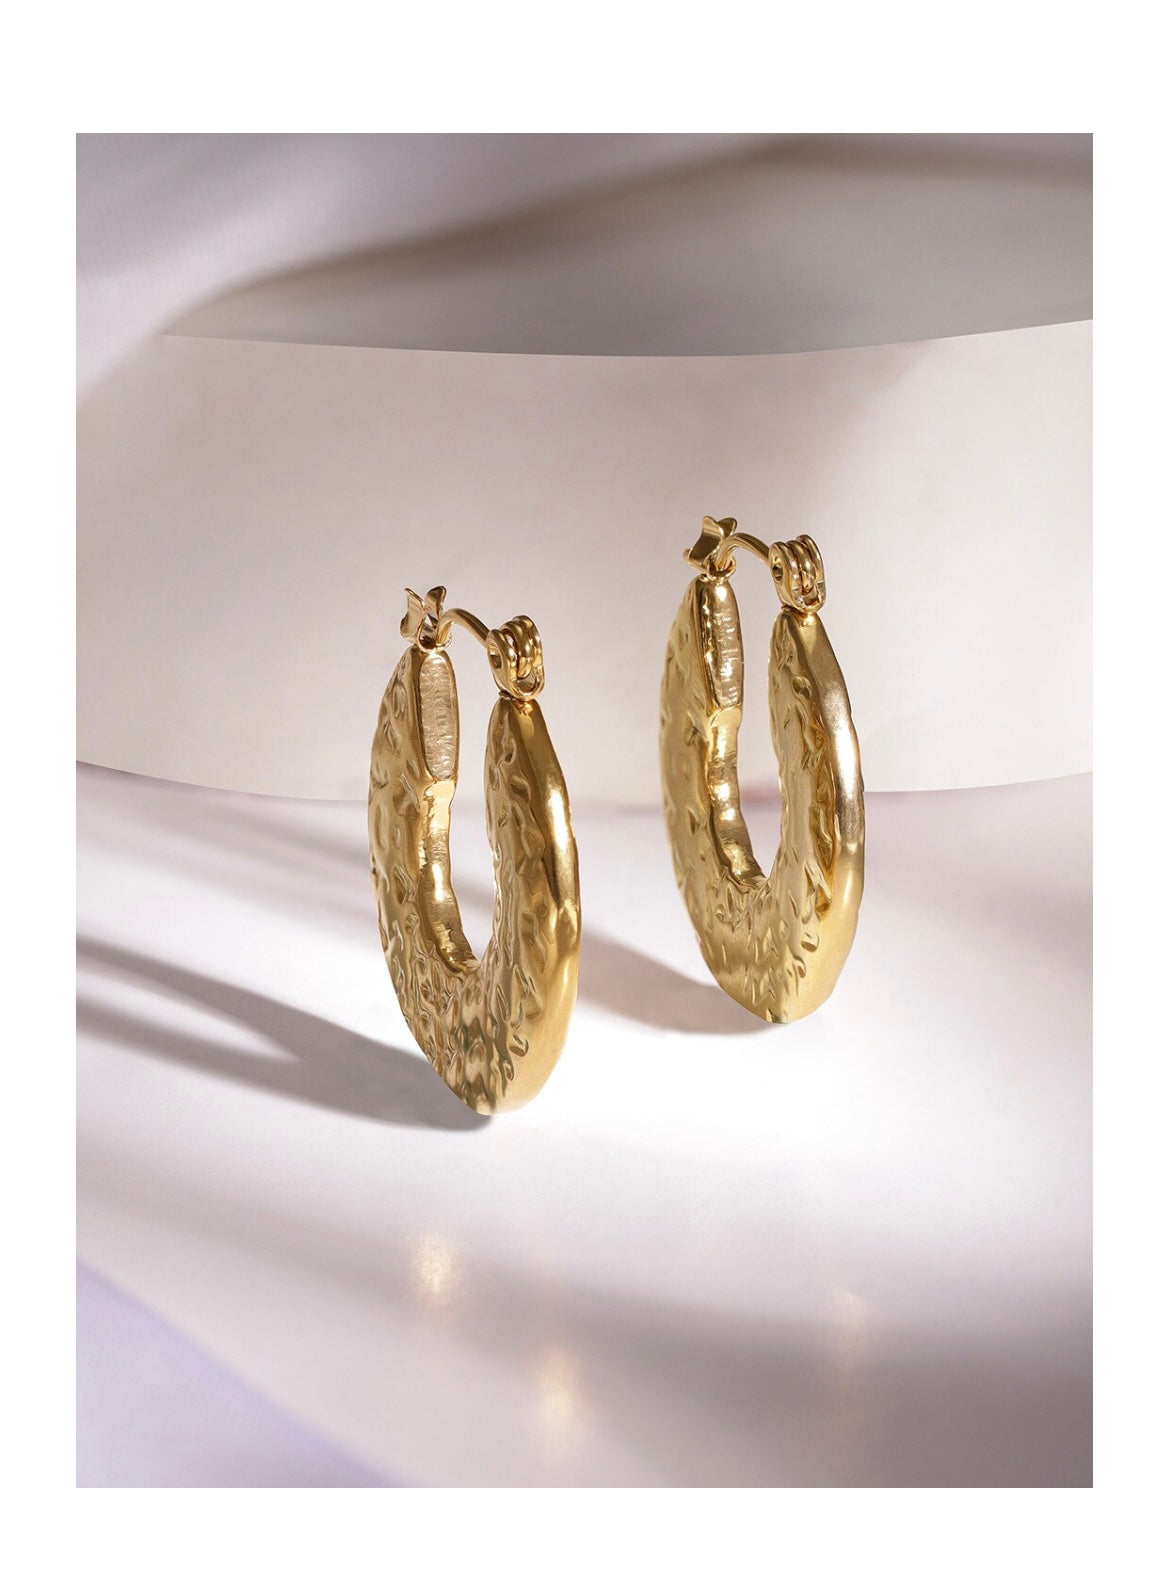 Gold Round Hoop Earrings for Her